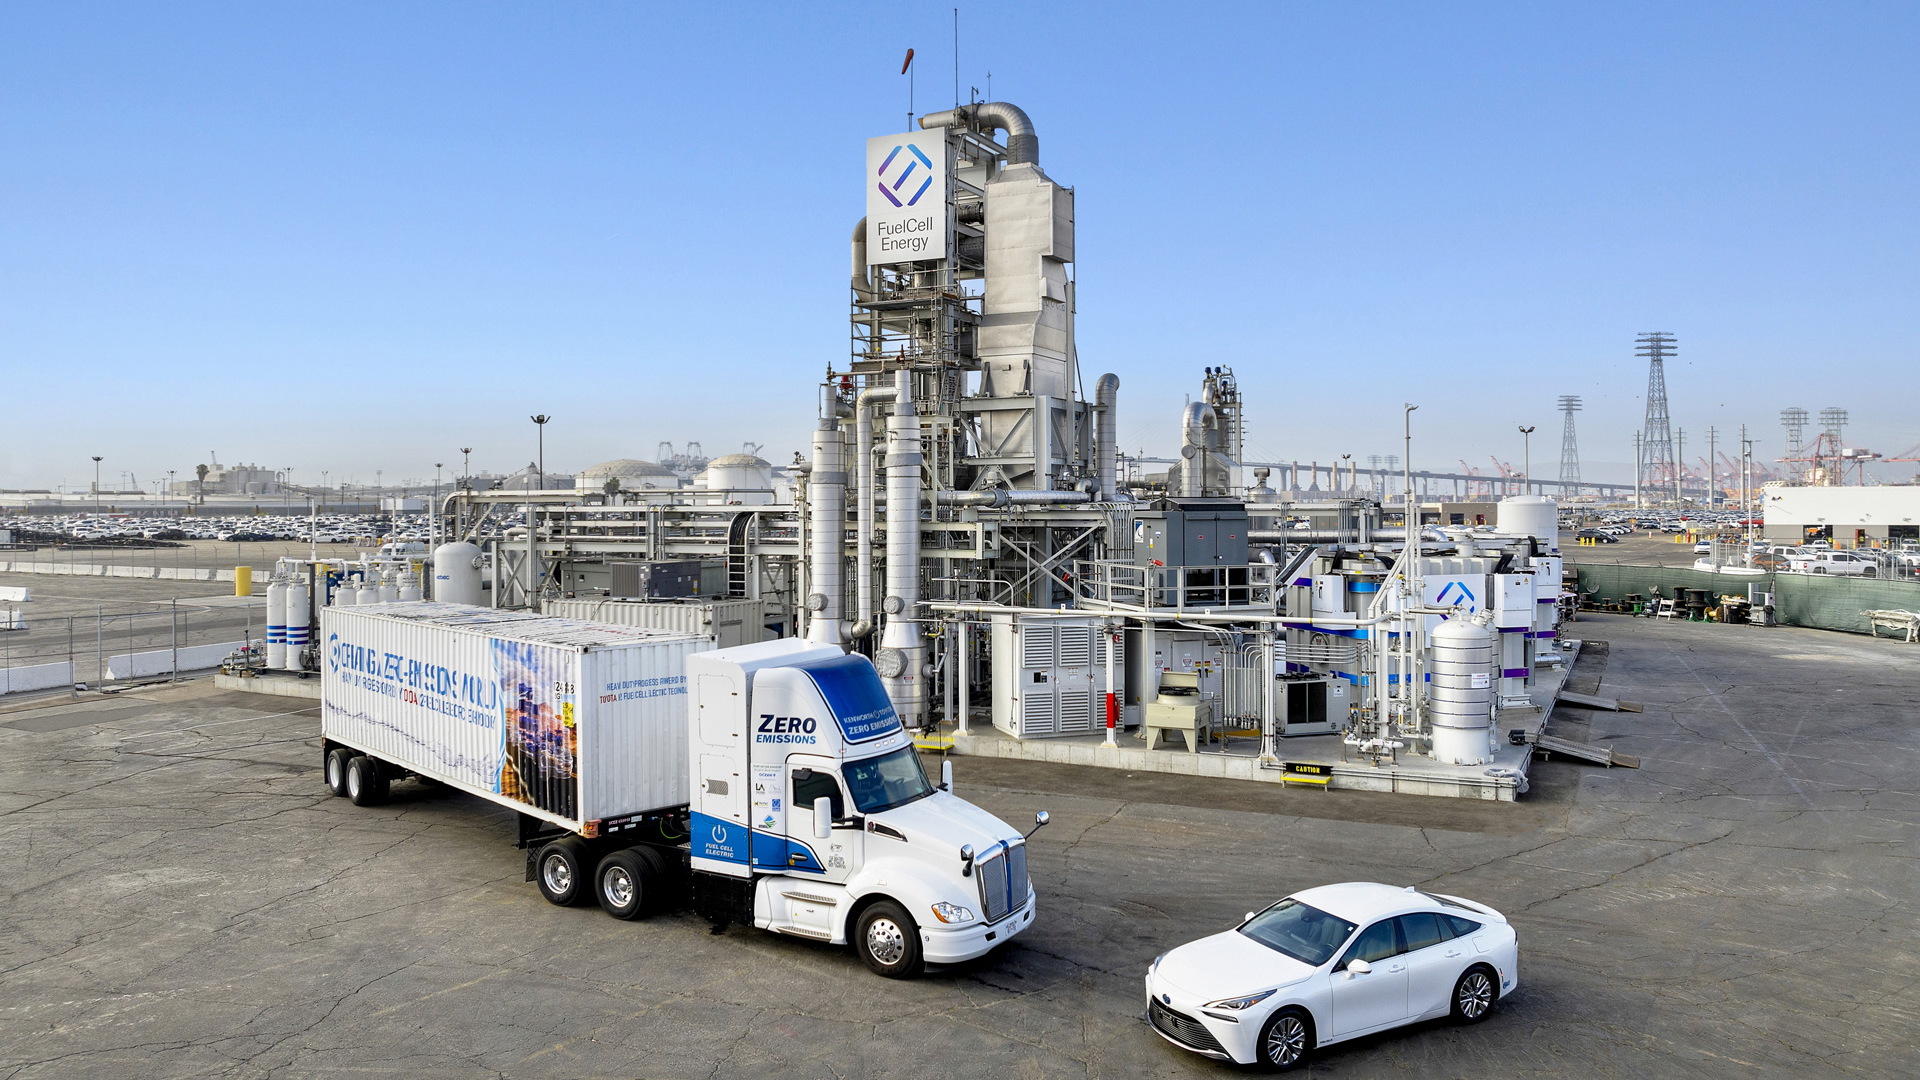 FuelCell Energy's Tri-Gen plant at Port of Long Beach, California